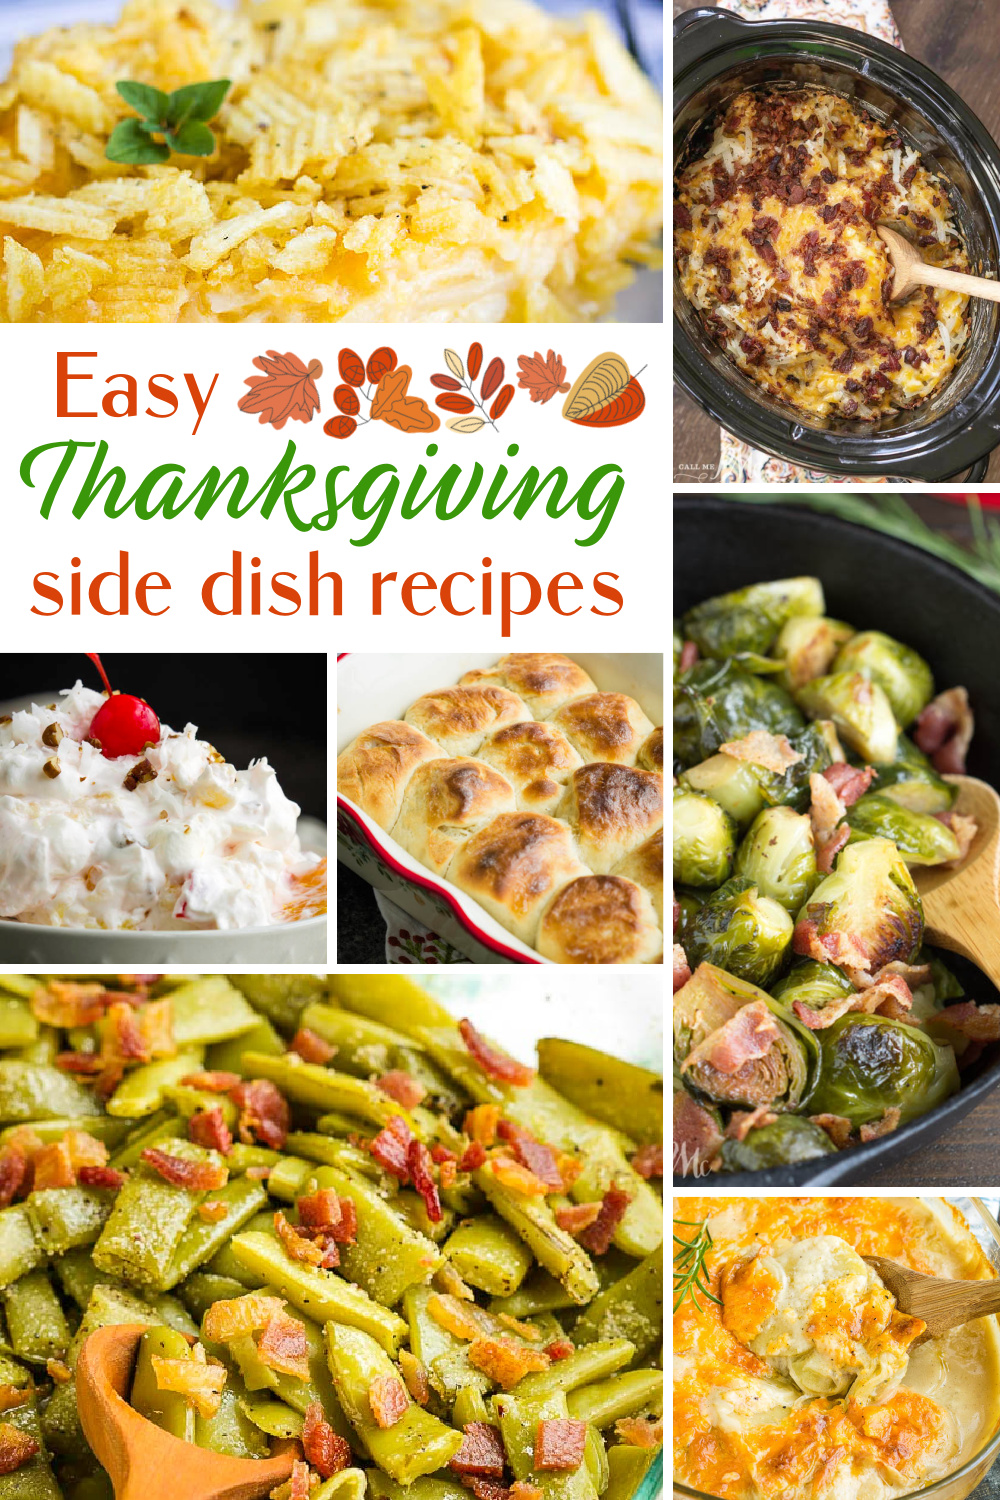 BEST HOLIDAY SIDE DISH RECIPES